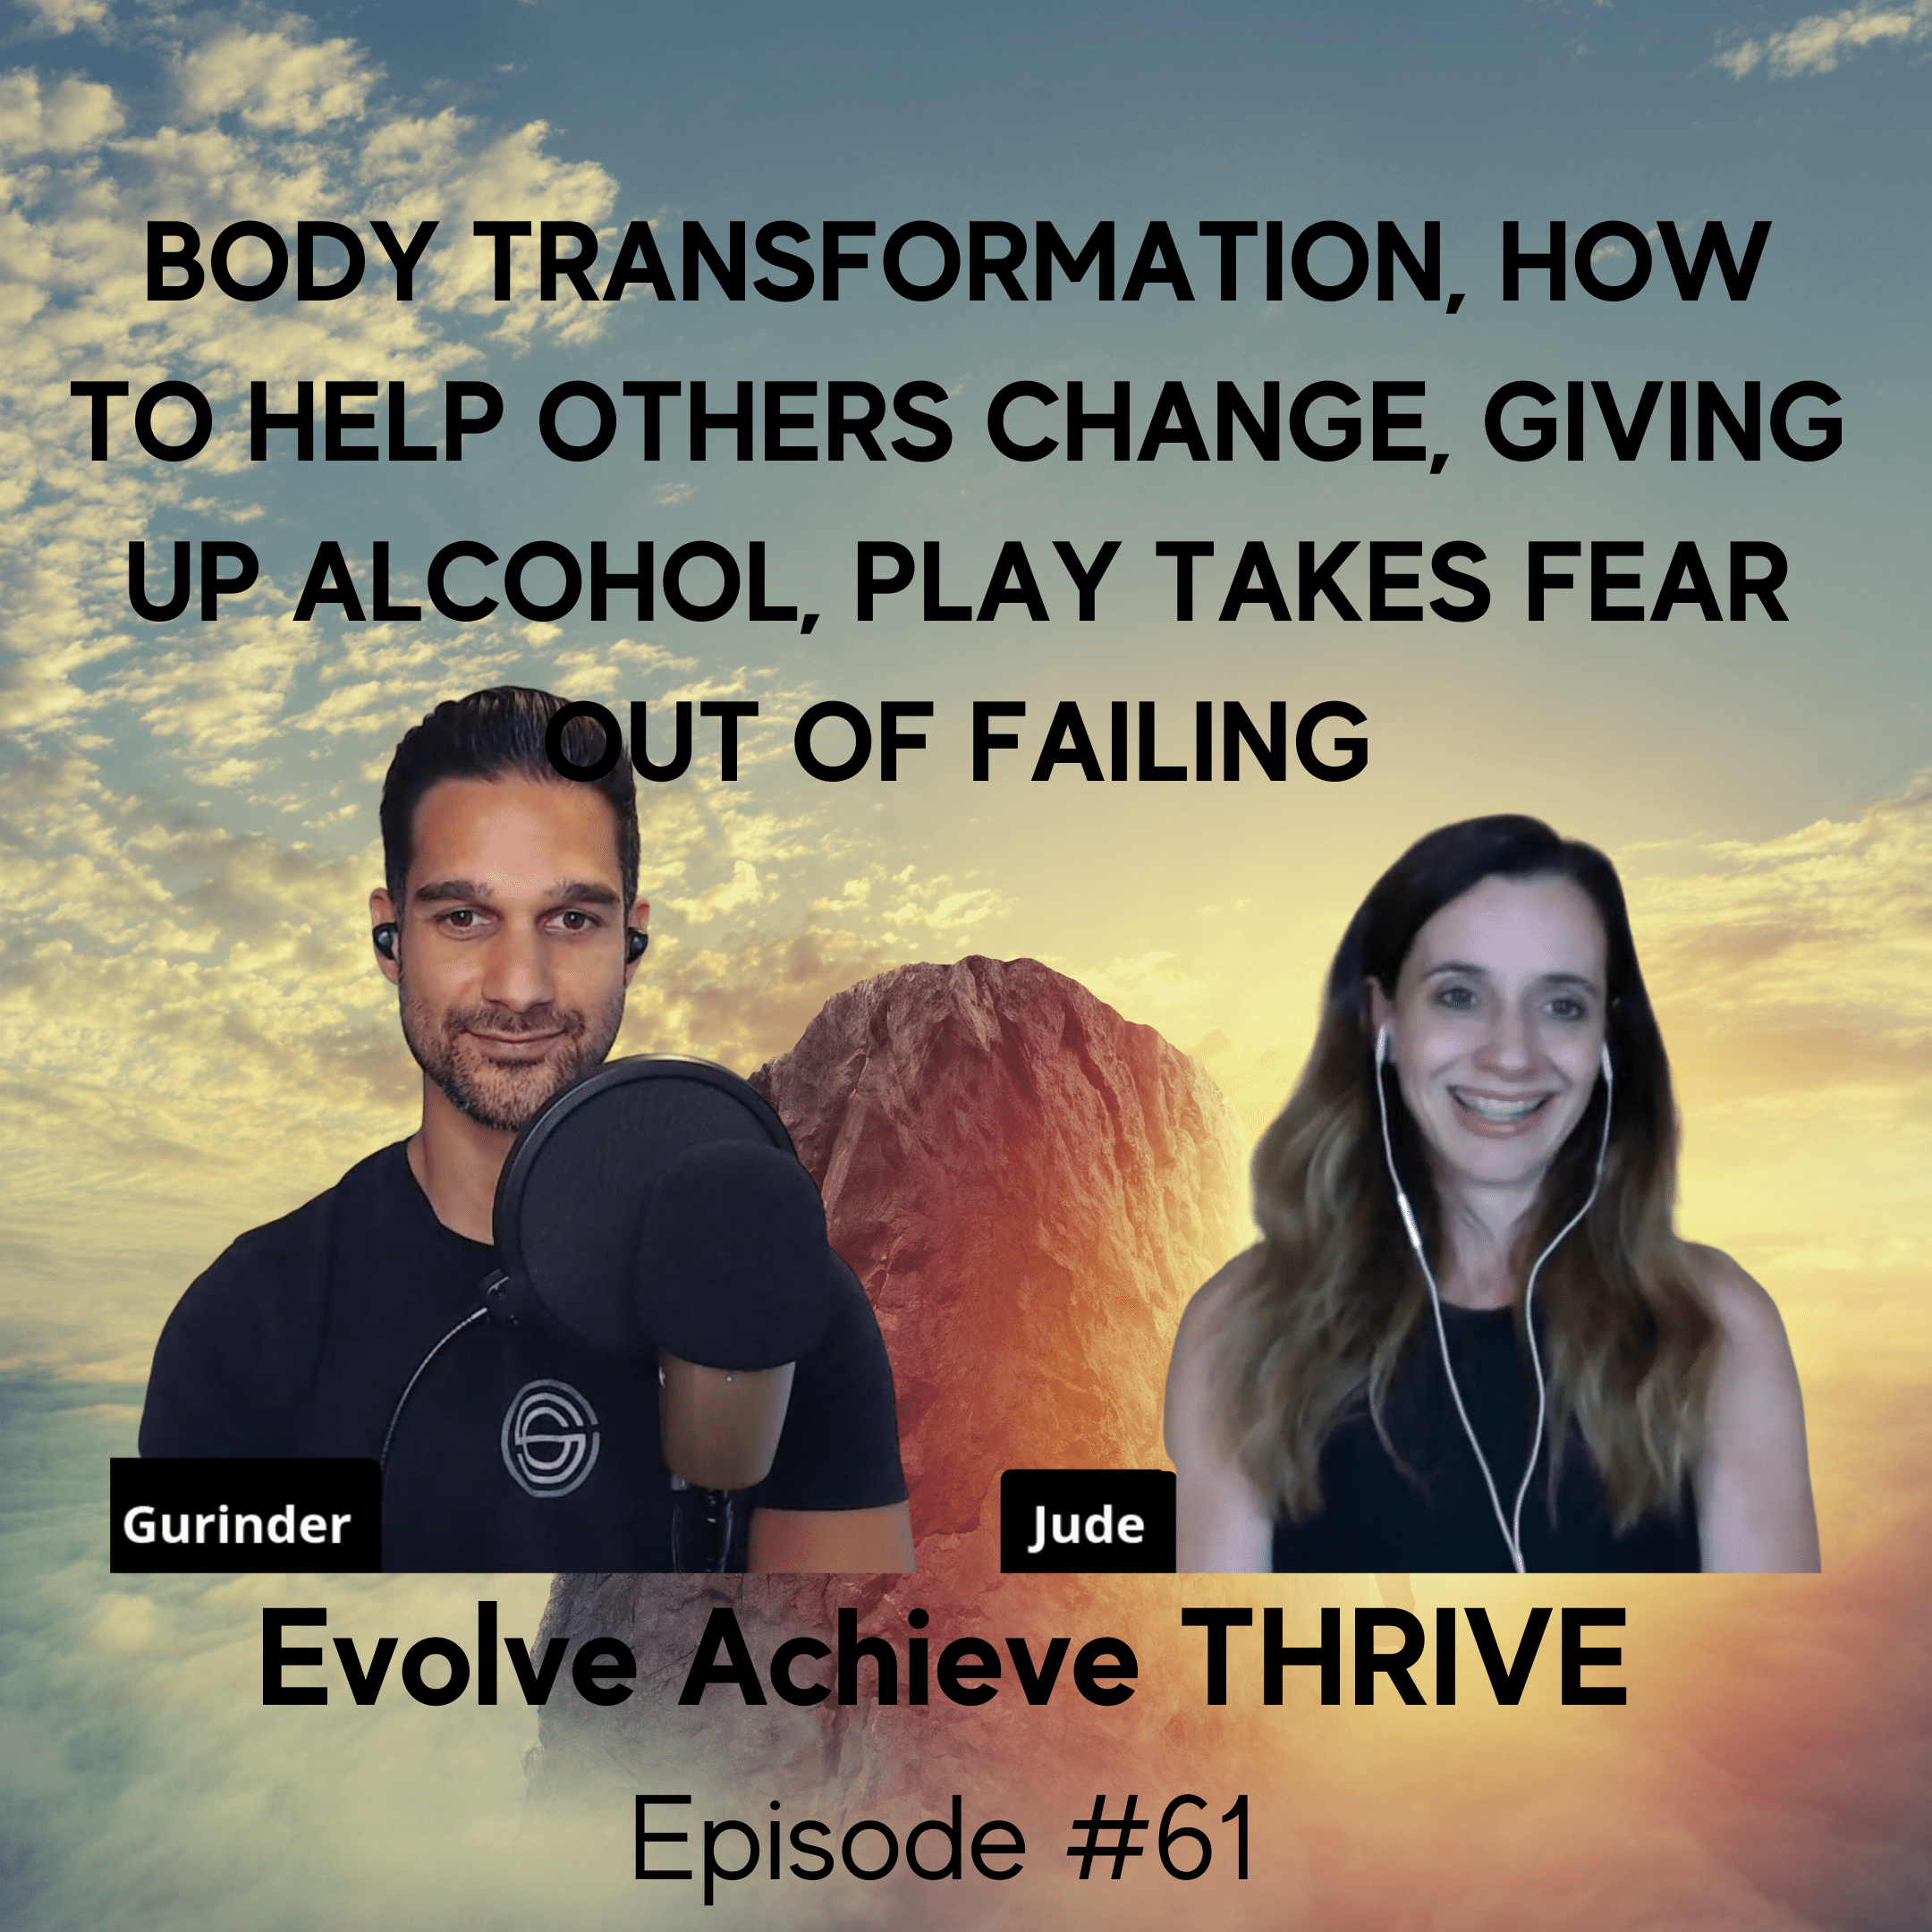 #61 Body Transformation, How to Help Others Change, Giving Up Alcohol, Play Takes the Fear Out of Failing